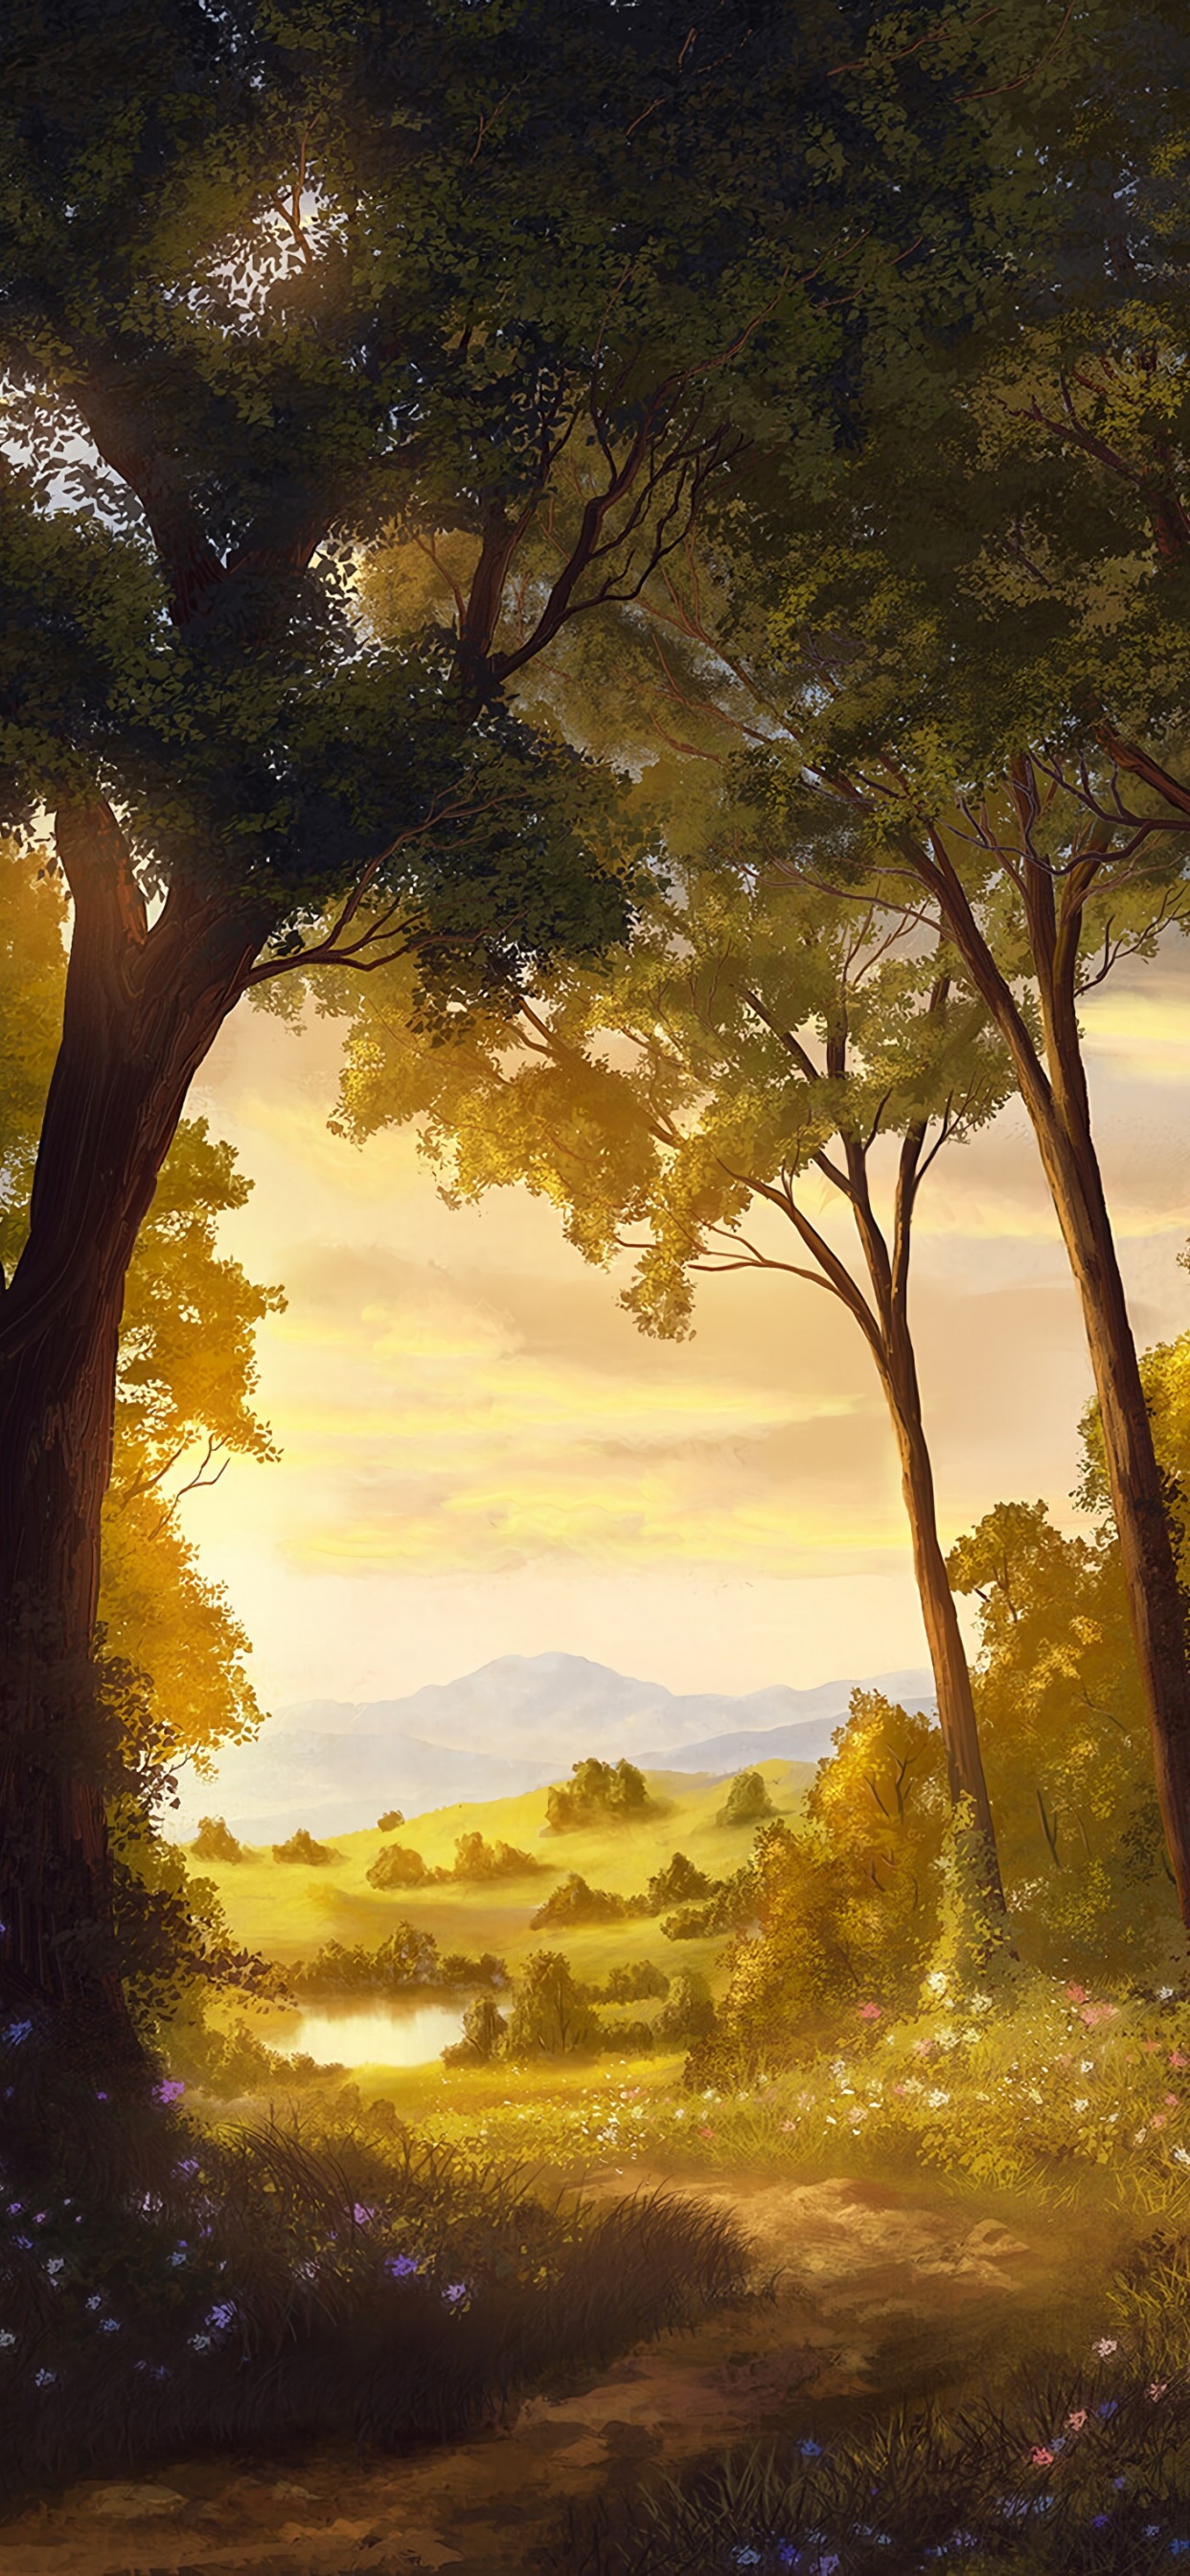 Natural Landscape, Nature, Tree, Painting, Sunlight. Wallpaper in 1242x2688 Resolution